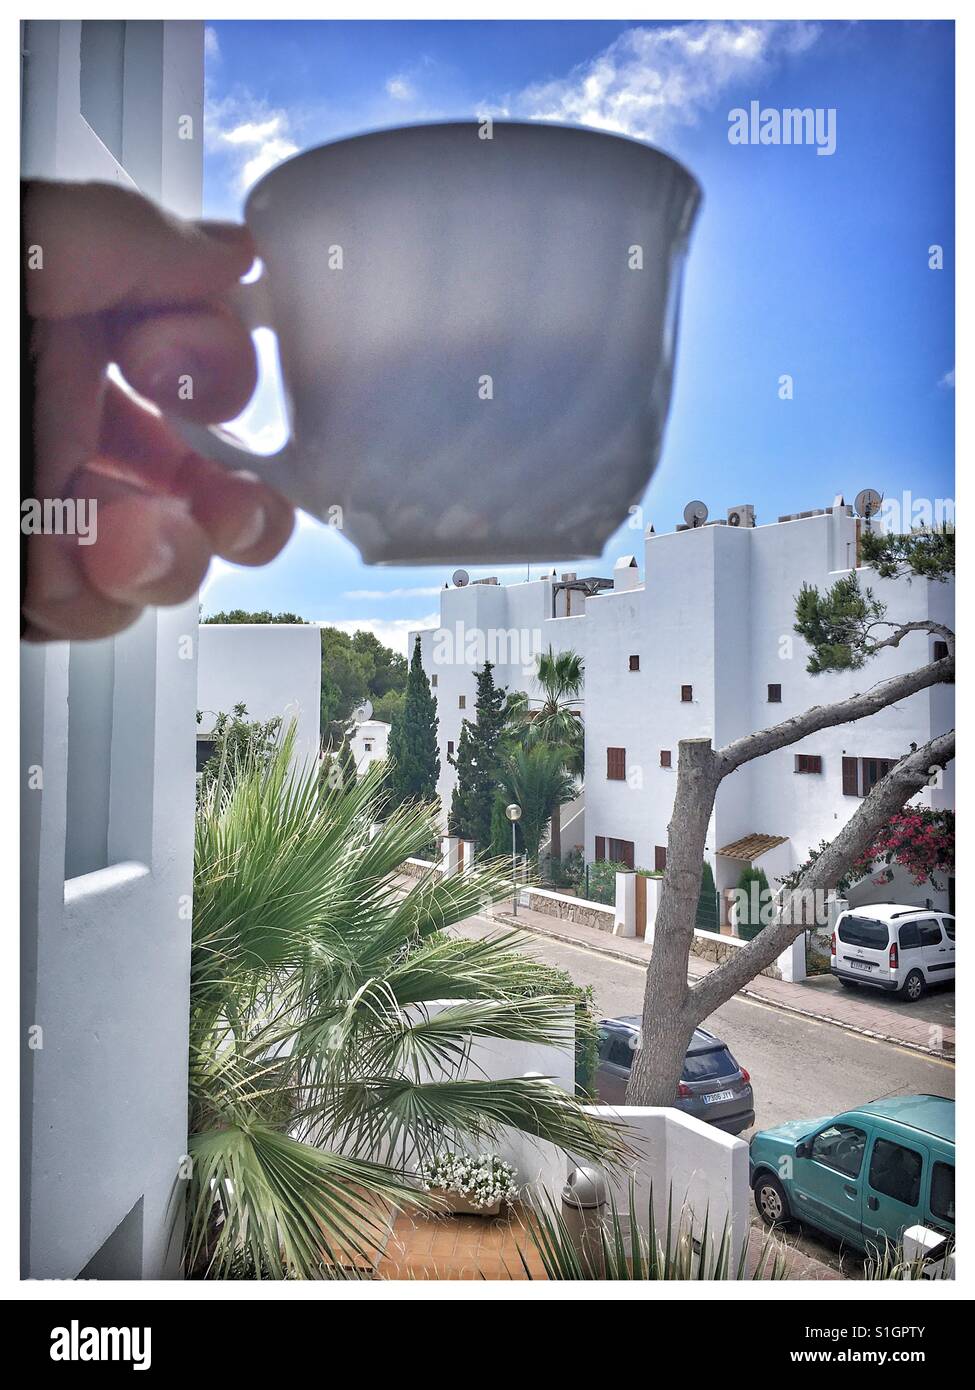 A cup of tea for breakfast in Spain. Stock Photo